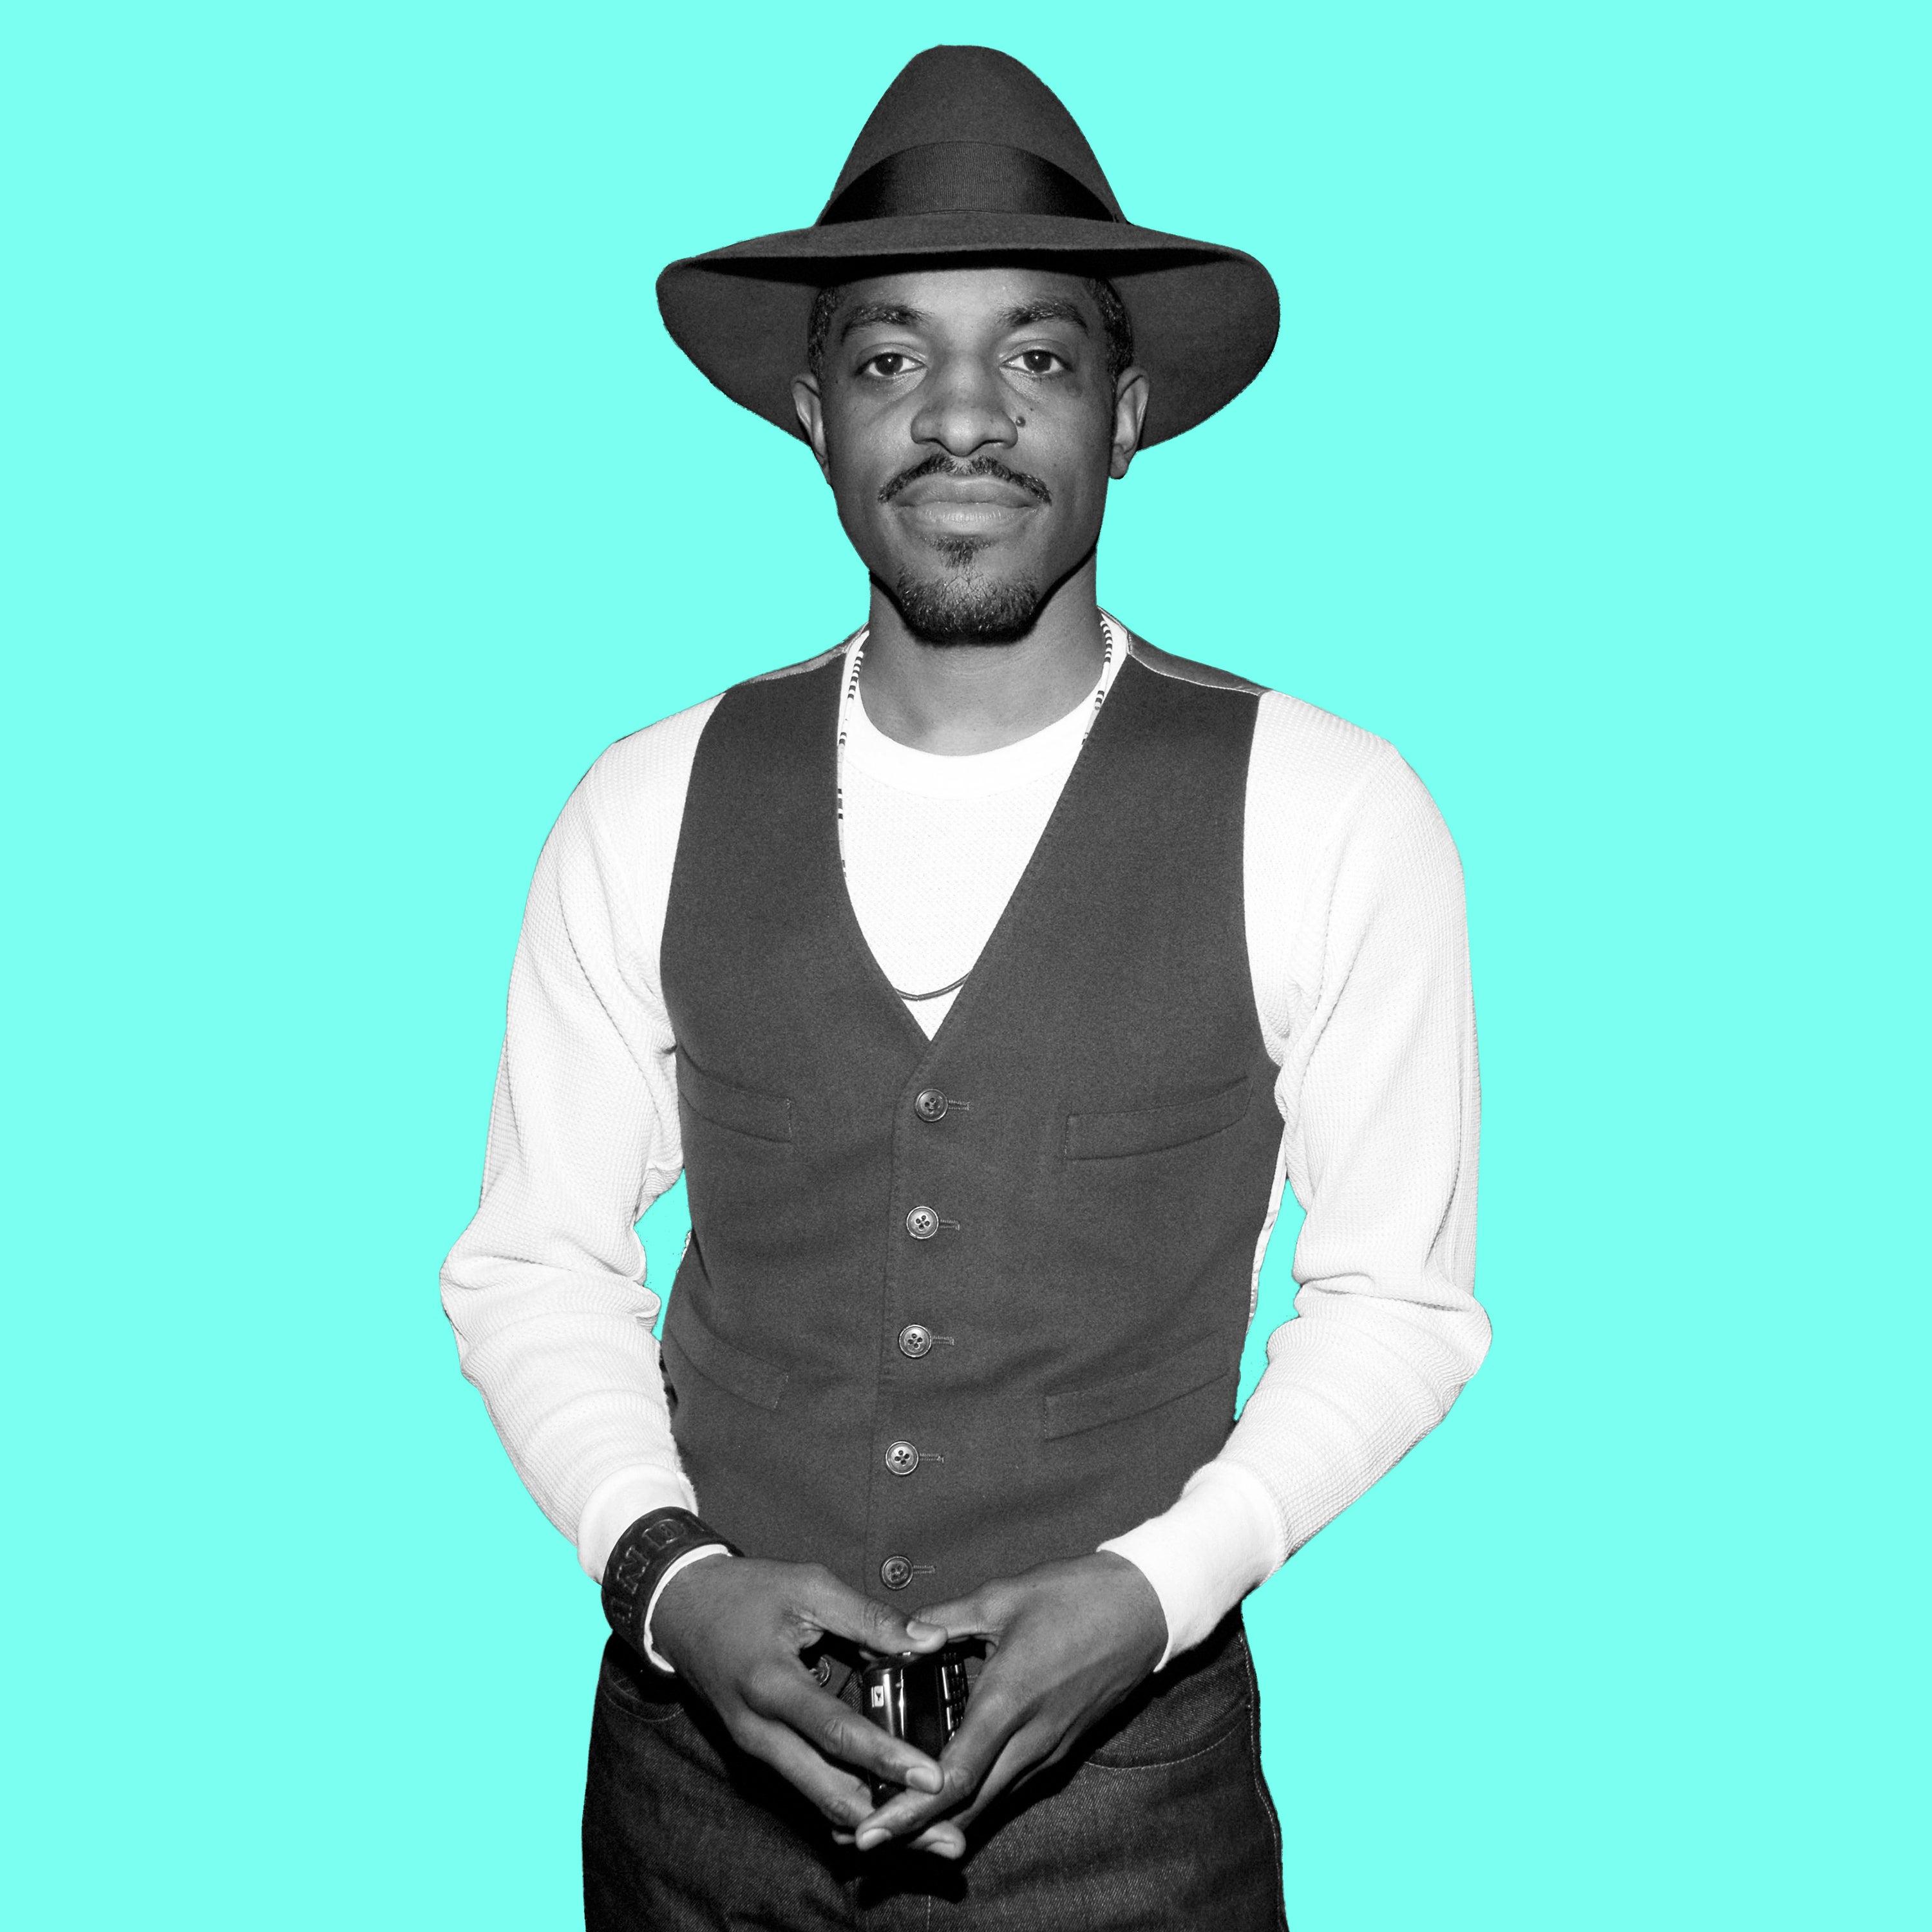 Andre 3000 Is Obsessed With Anita Baker And Plans To Design A Line Of T-Shirts Inspired By Her